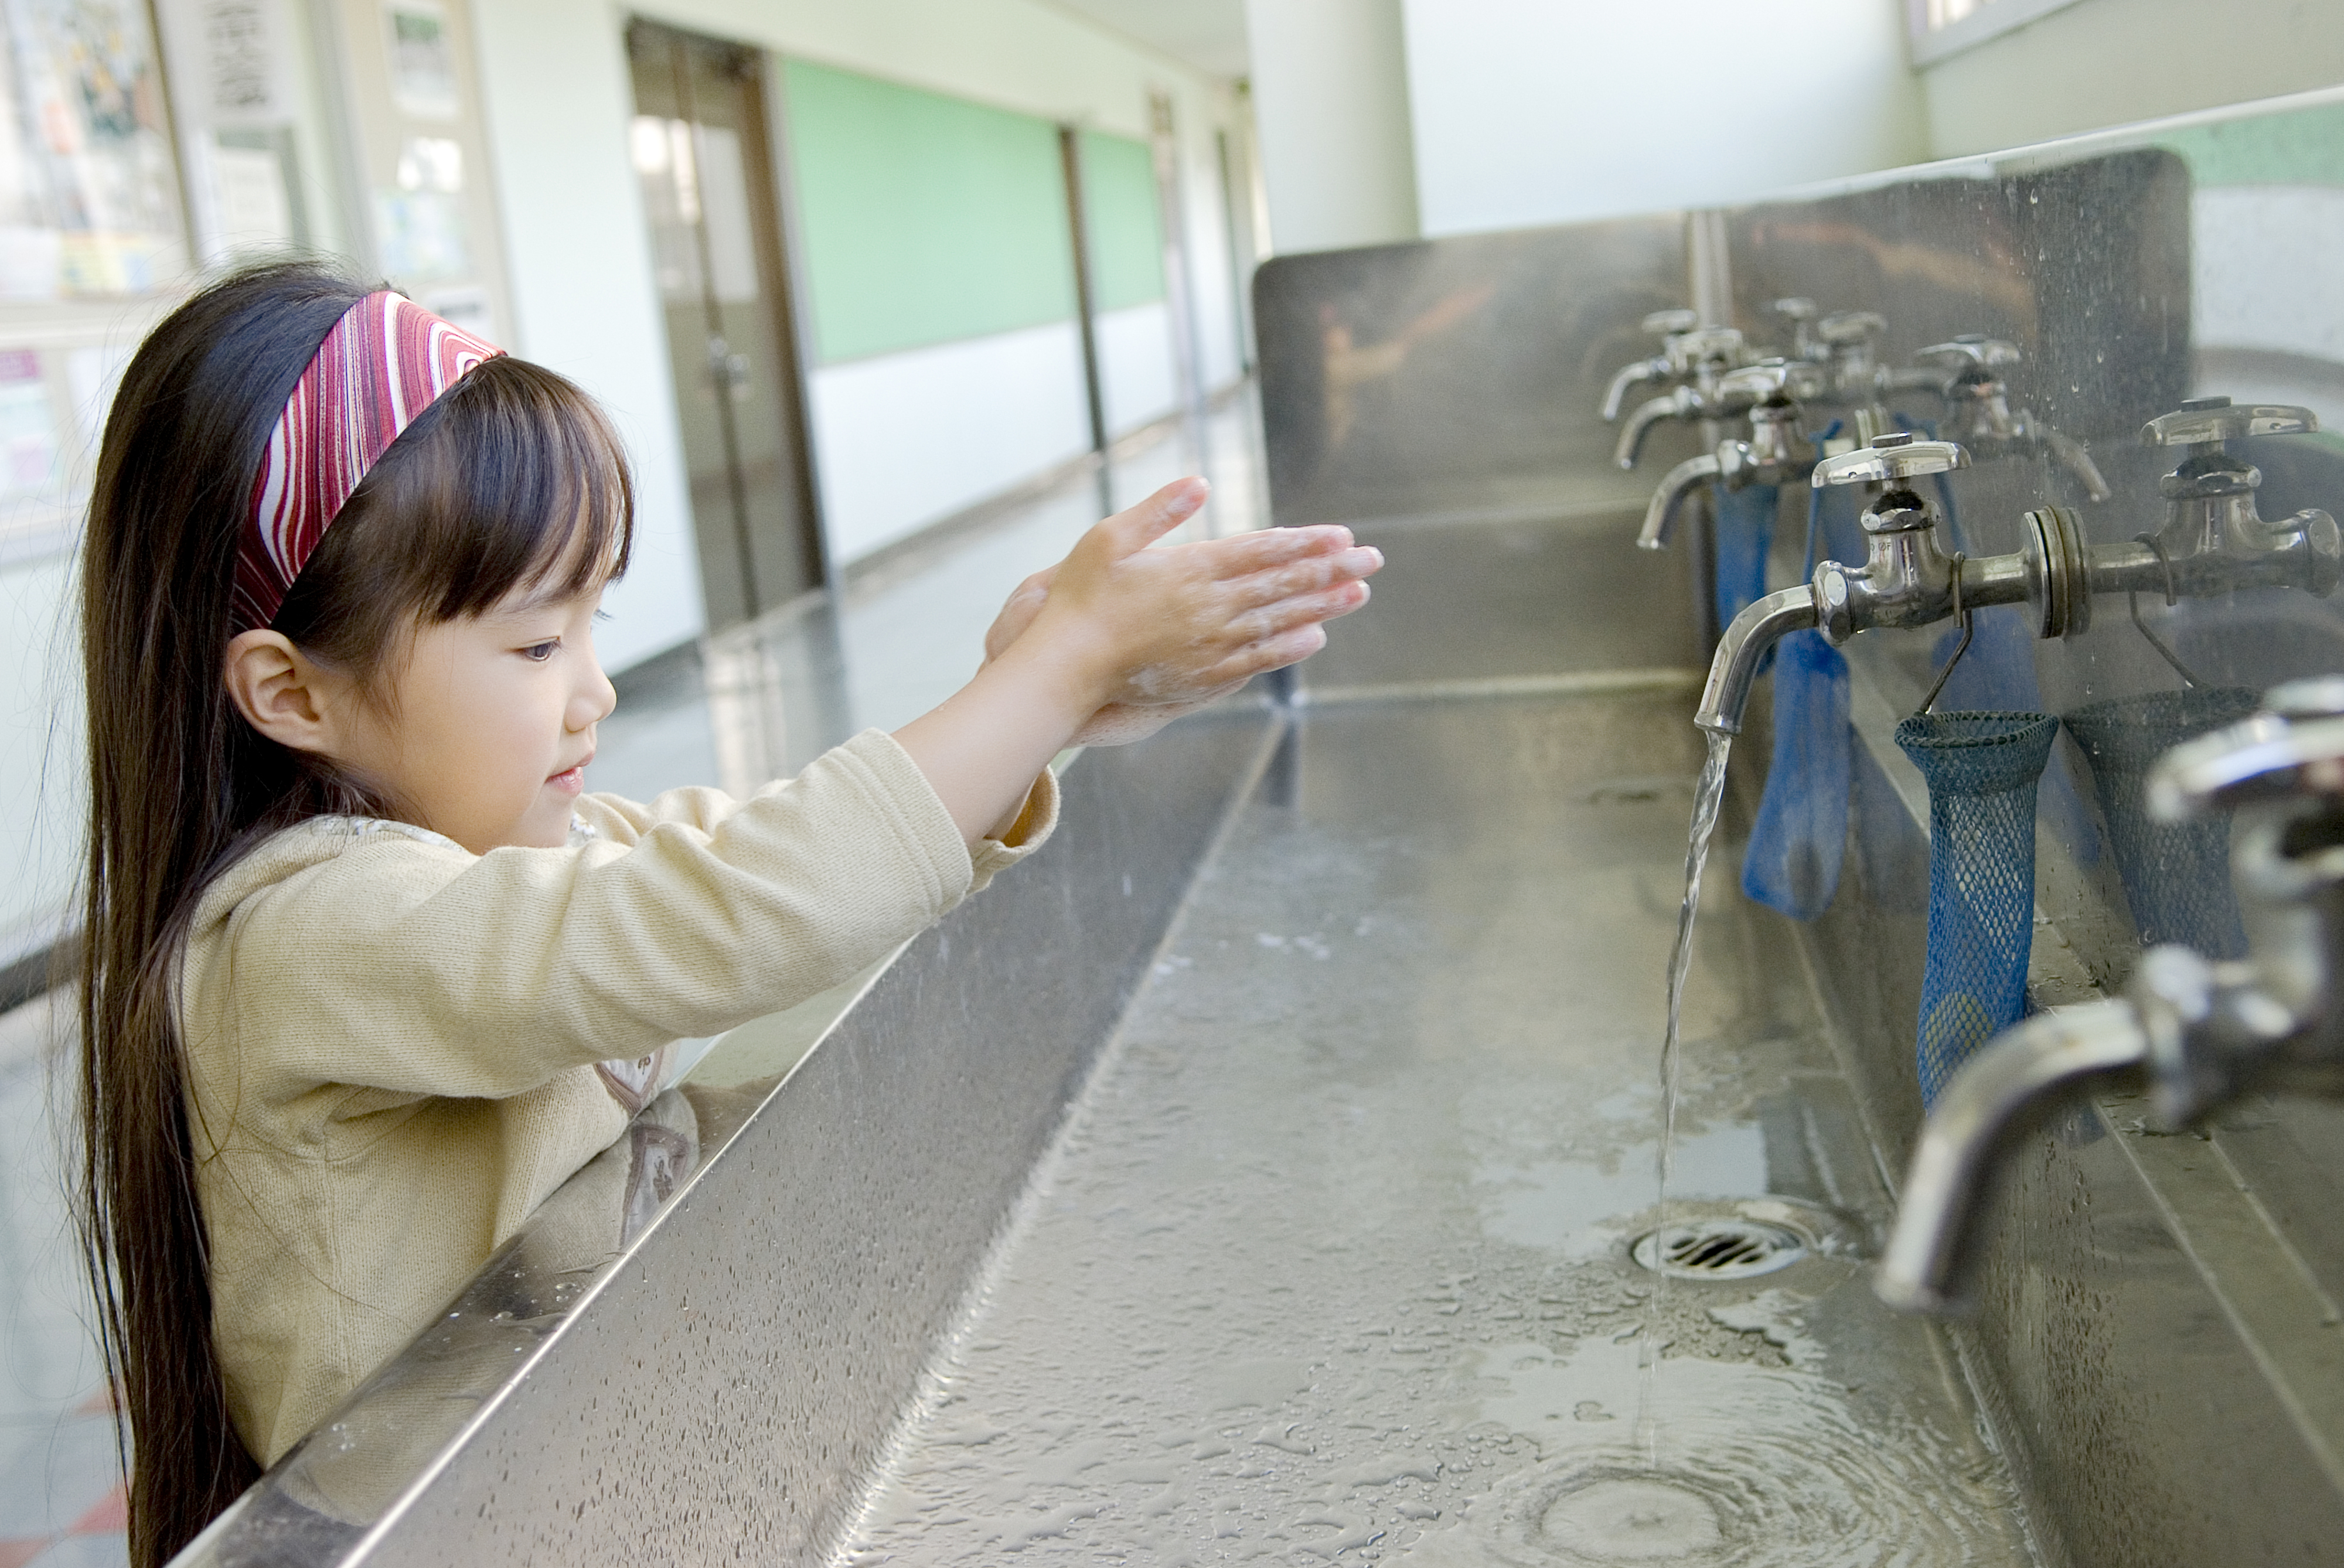 A young child washes hands at a public sink, highlighting hygienic practices while traveling